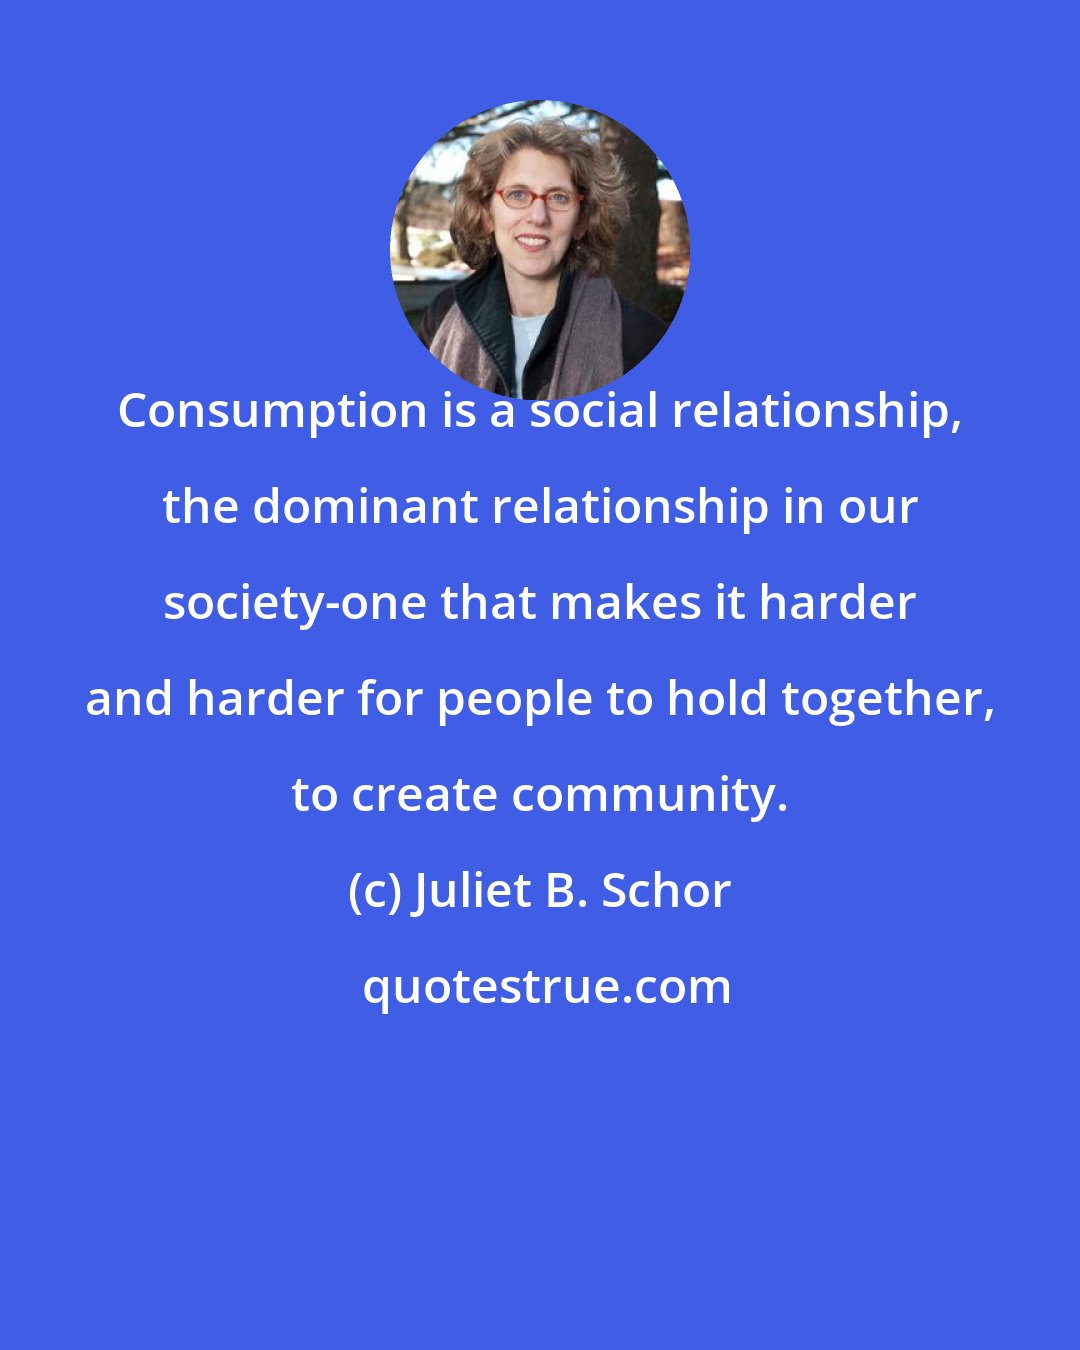 Juliet B. Schor: Consumption is a social relationship, the dominant relationship in our society-one that makes it harder and harder for people to hold together, to create community.